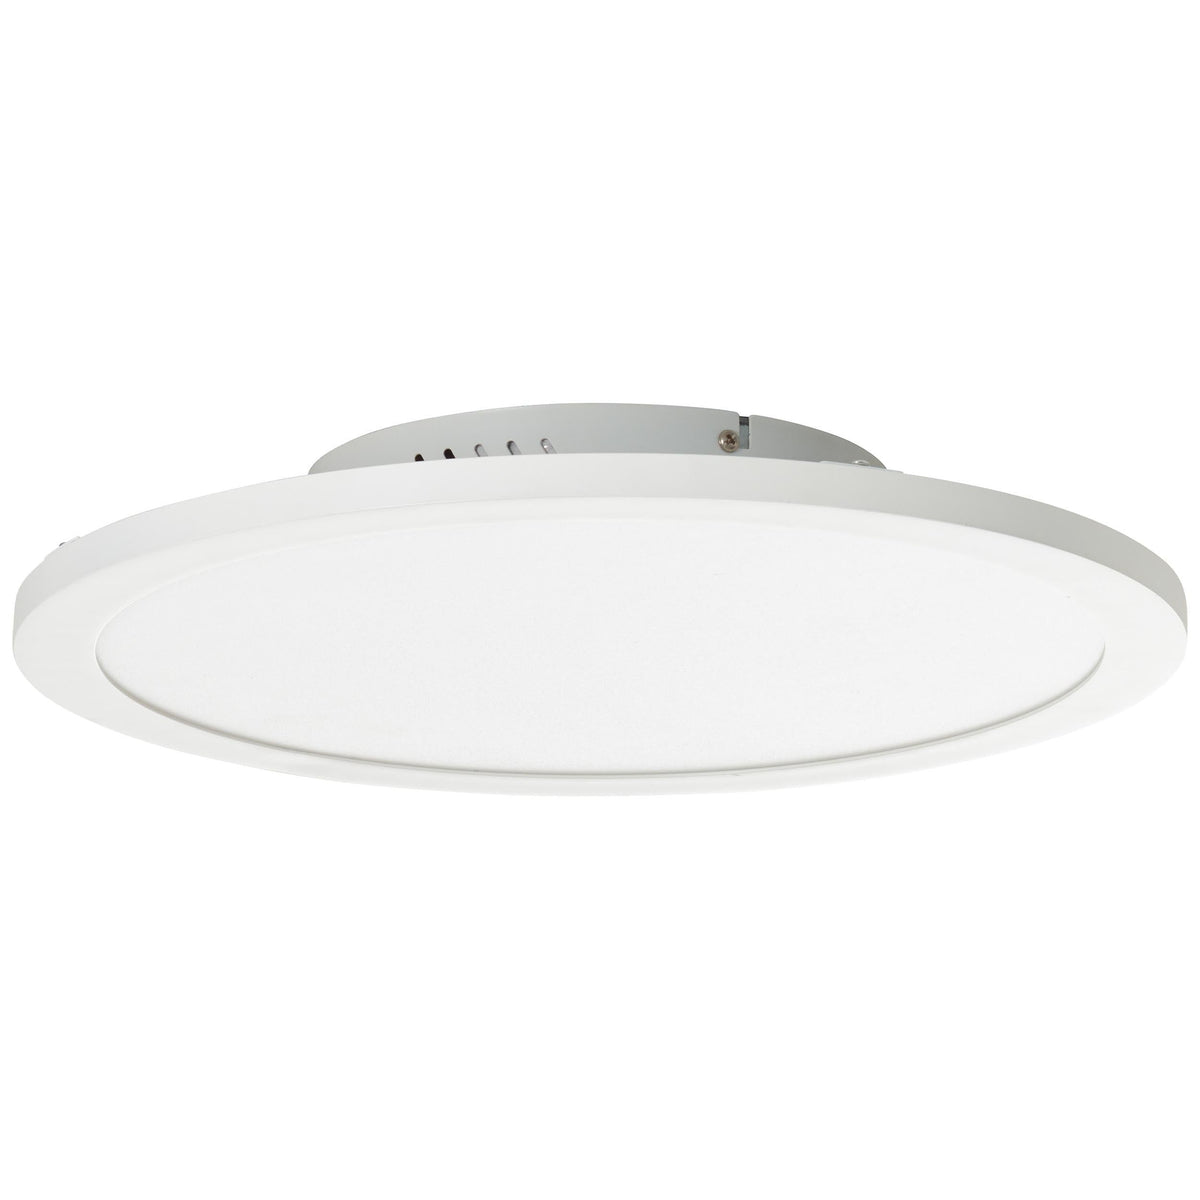 Brilliant 1 Light 24W Abie LED Round Ceiling Panel - White | G97060/05 from DID Electrical - guaranteed Irish, guaranteed quality service. (6977602453692)